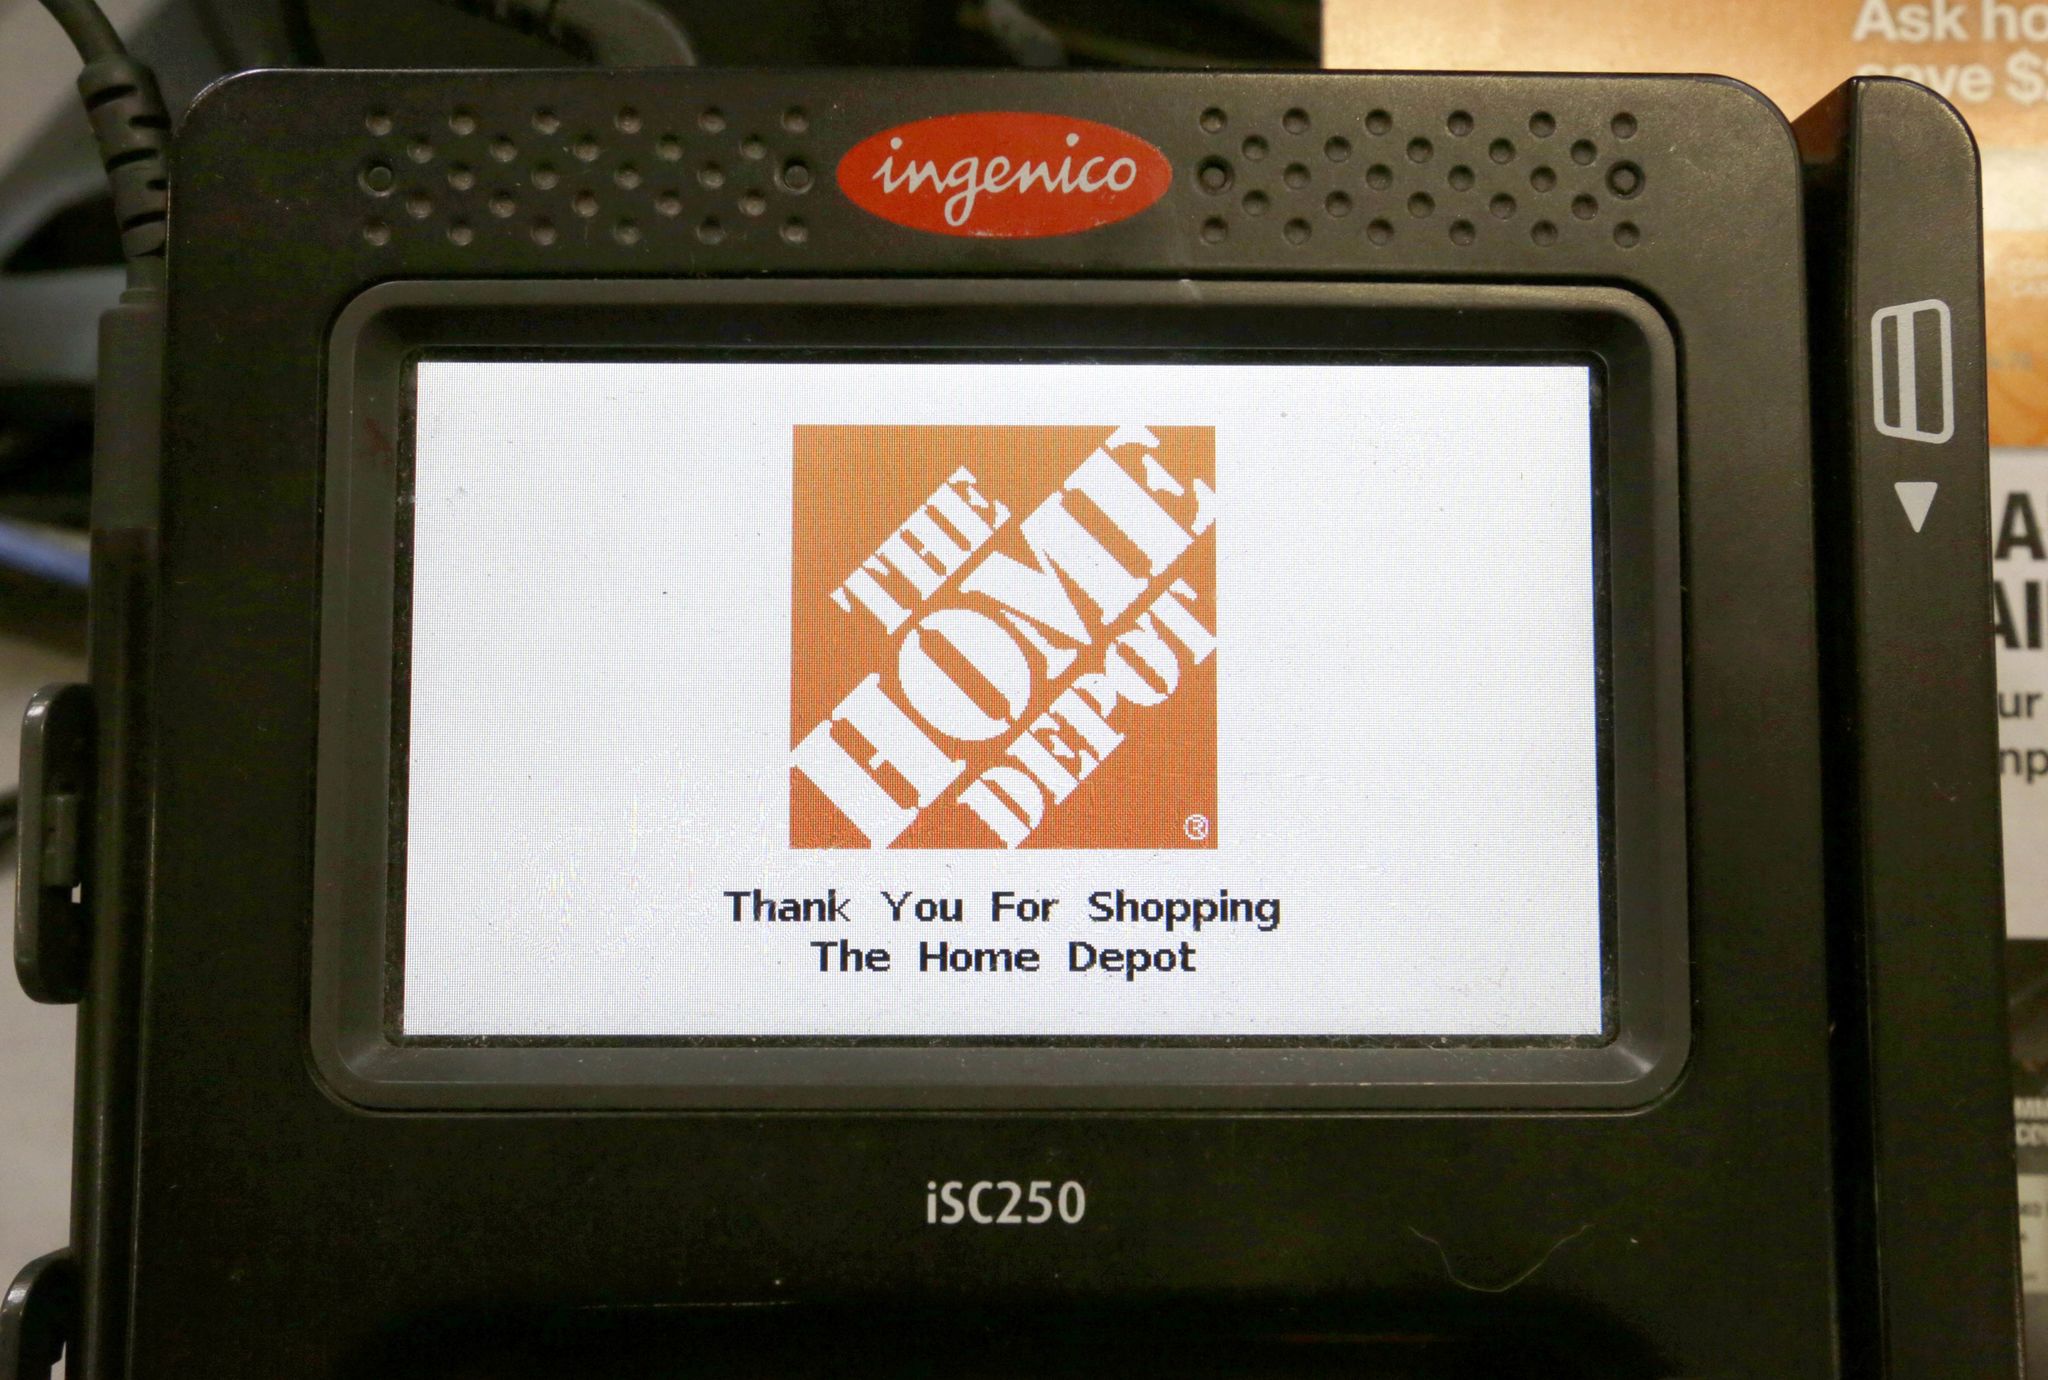 The Home Depot logo appears on a credit card reader at a Home Depot store in Bellingham, Massachusetts.